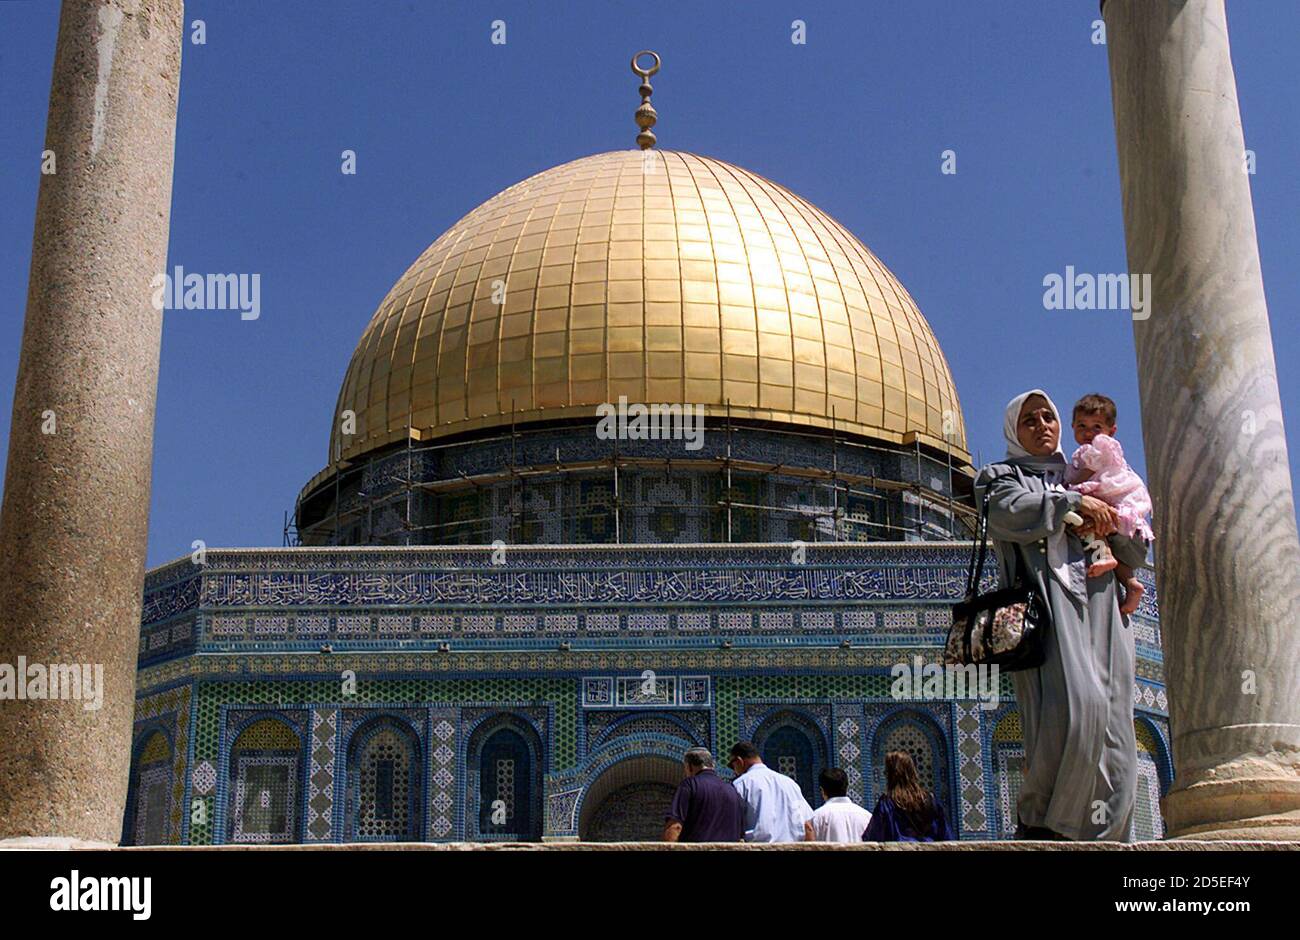 A Palestinian woman carries her child as she leaves the Dome of the Rock  after praying in the Temple Mount complex which includes Al-Aqsa Mosque,  Islam's third most holy site in Jerusalem's